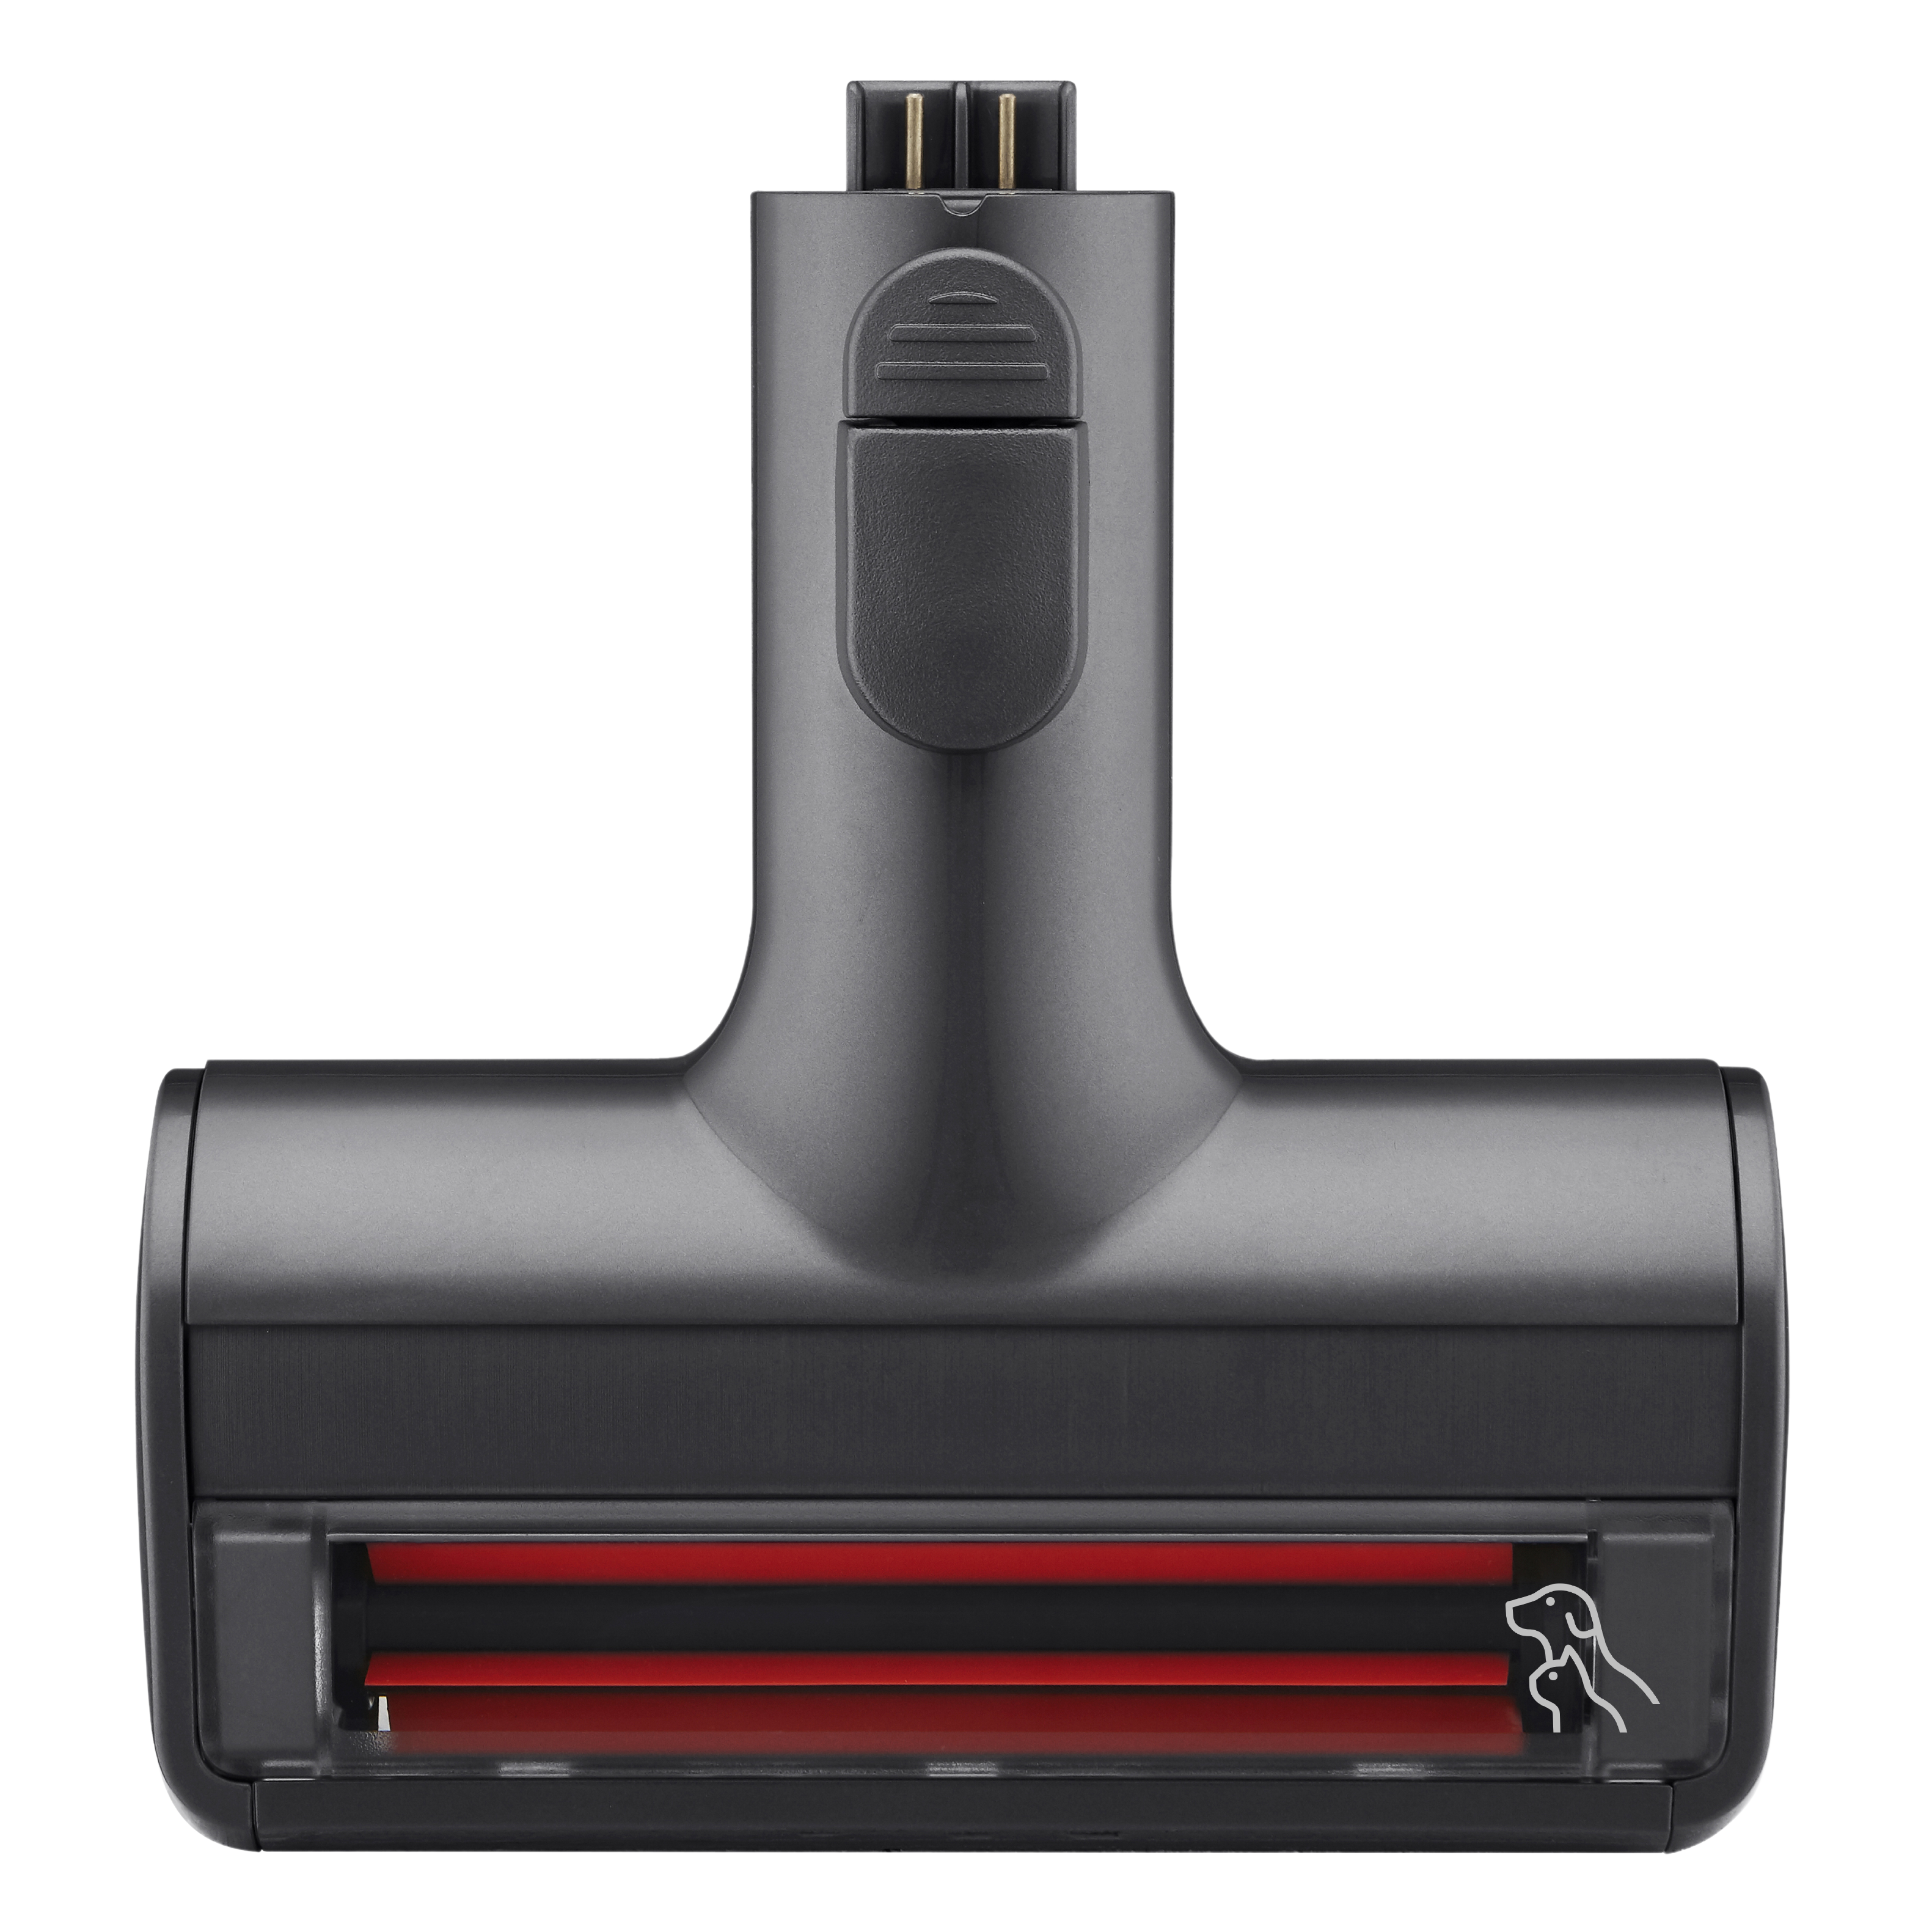 A9K-PRO1G LG Vacuum Rent from per Cleaner month €29.90 Cordless